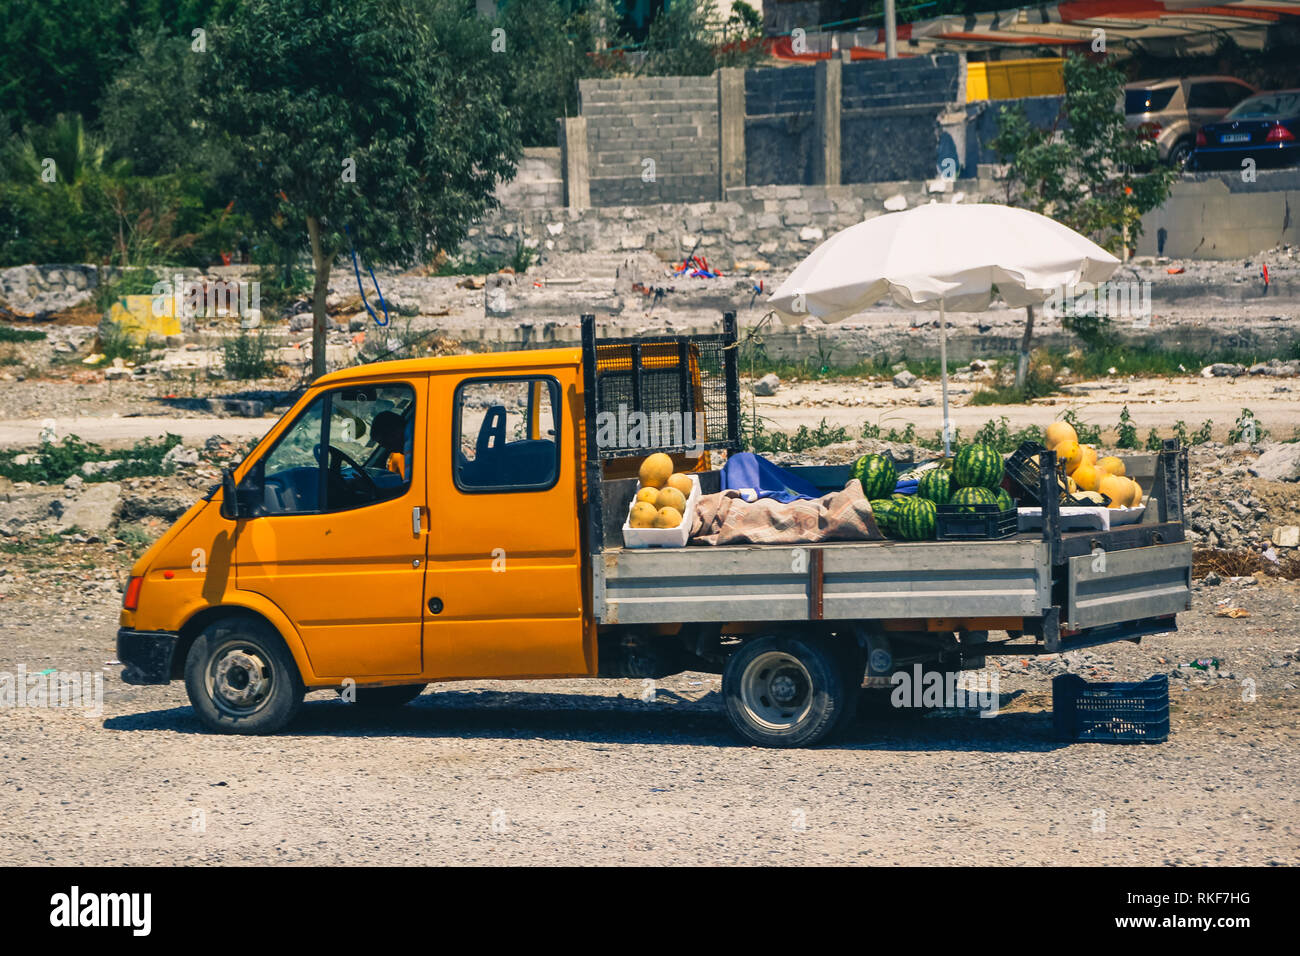 Street, car selling from a car, Albanian life, summer time. Stock Photo